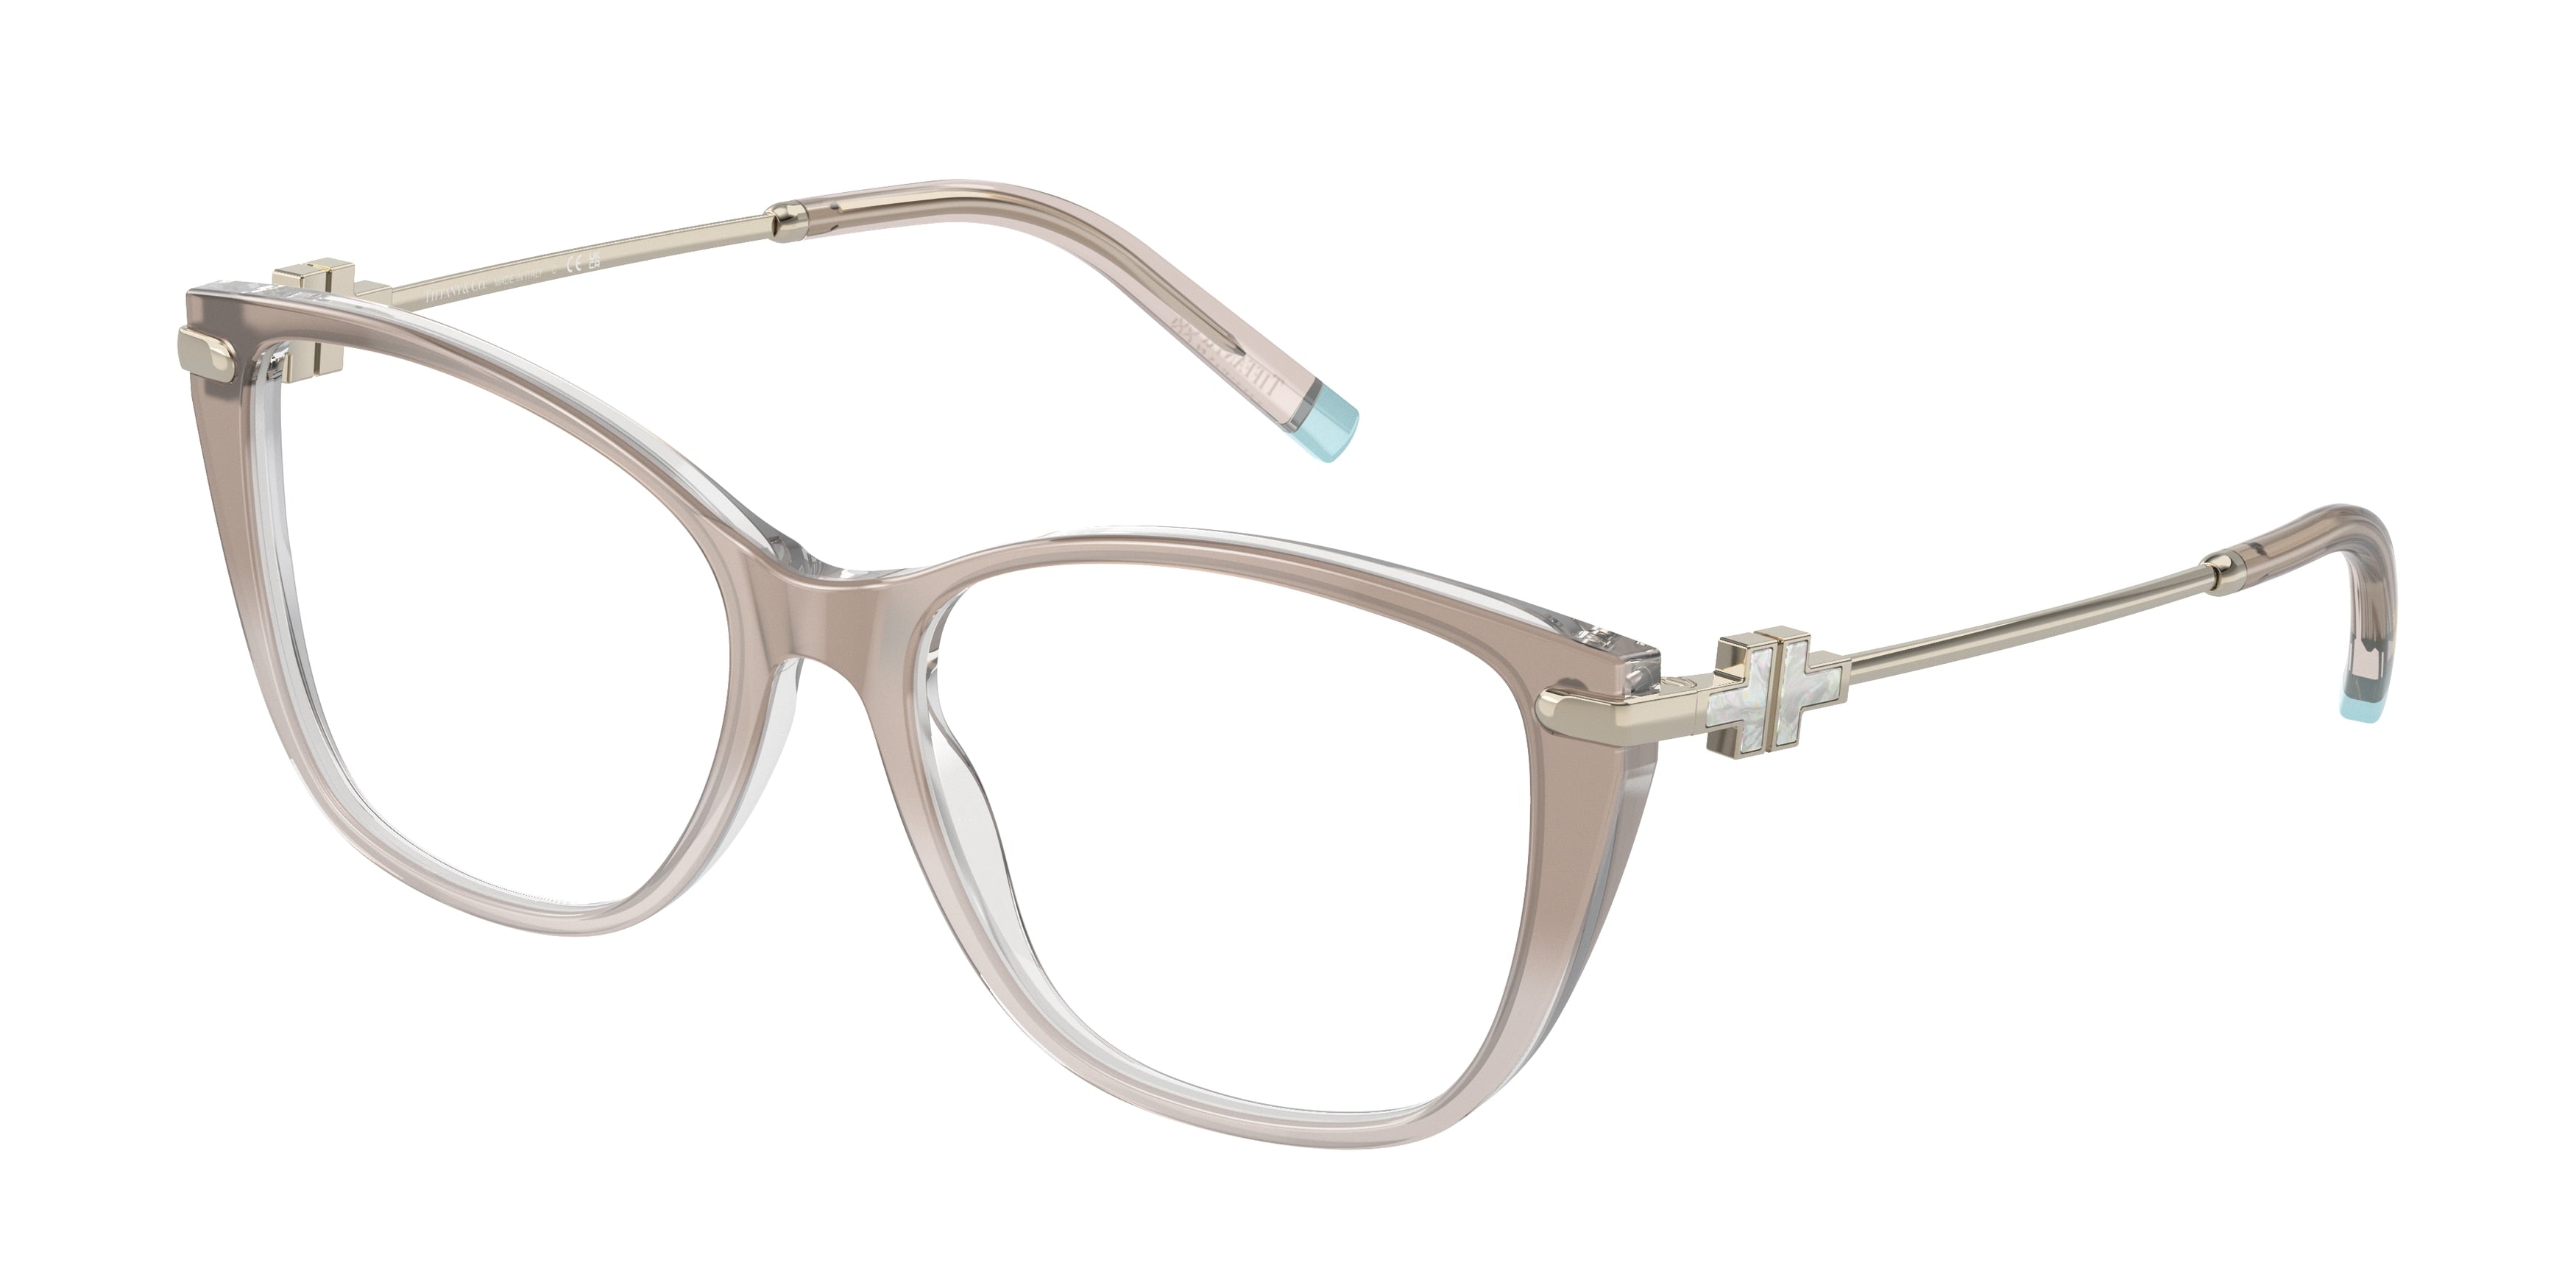 Tiffany TF2216 Butterfly Eyeglasses  8335-Satin Champagne Gradient 54-140-16 - Color Map Brown